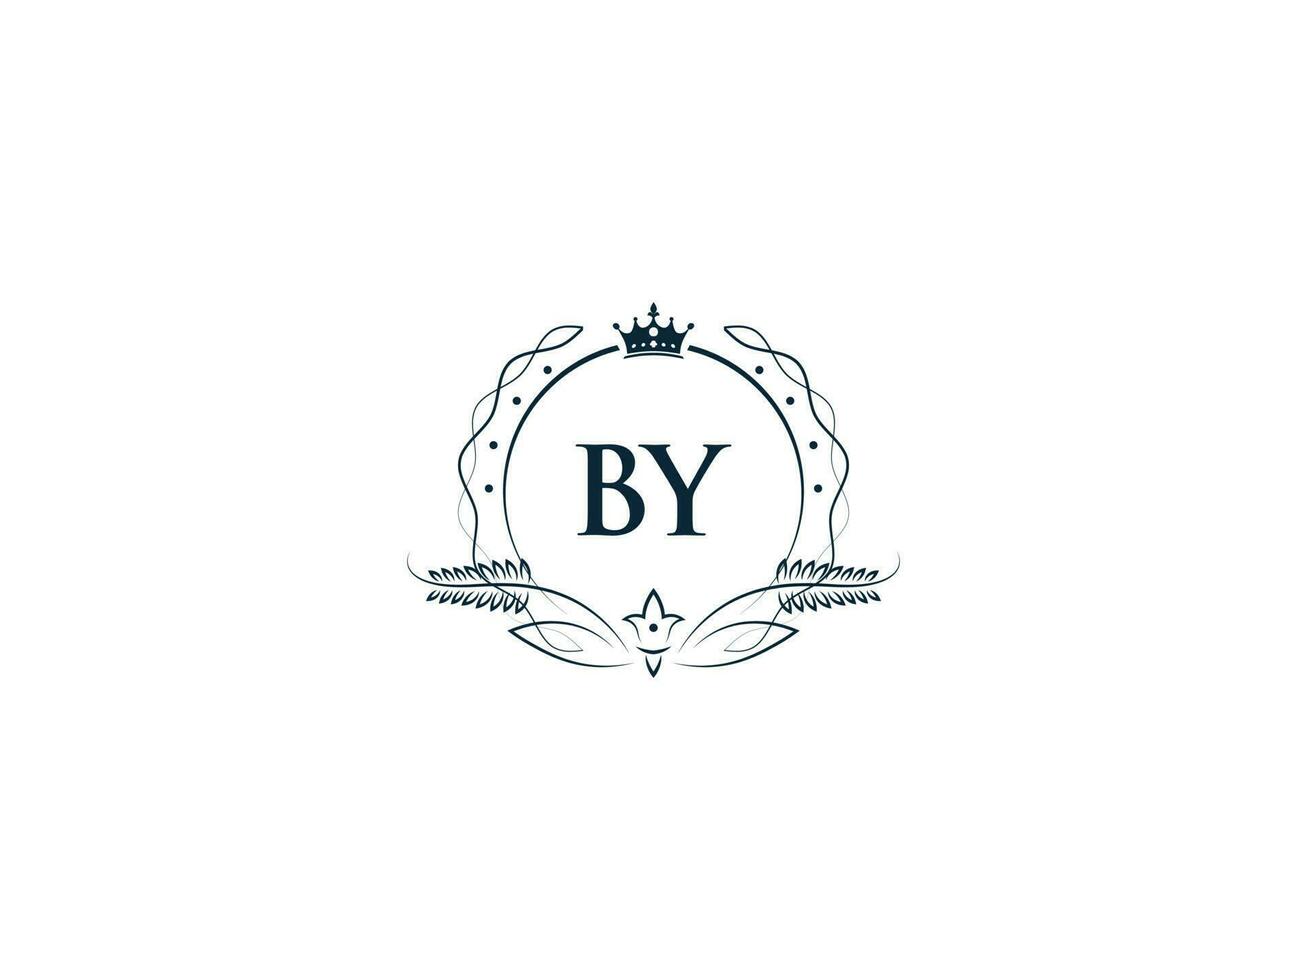 Professional By Luxury Business Logo, Feminine Crown By yb Logo Letter Vector Icon